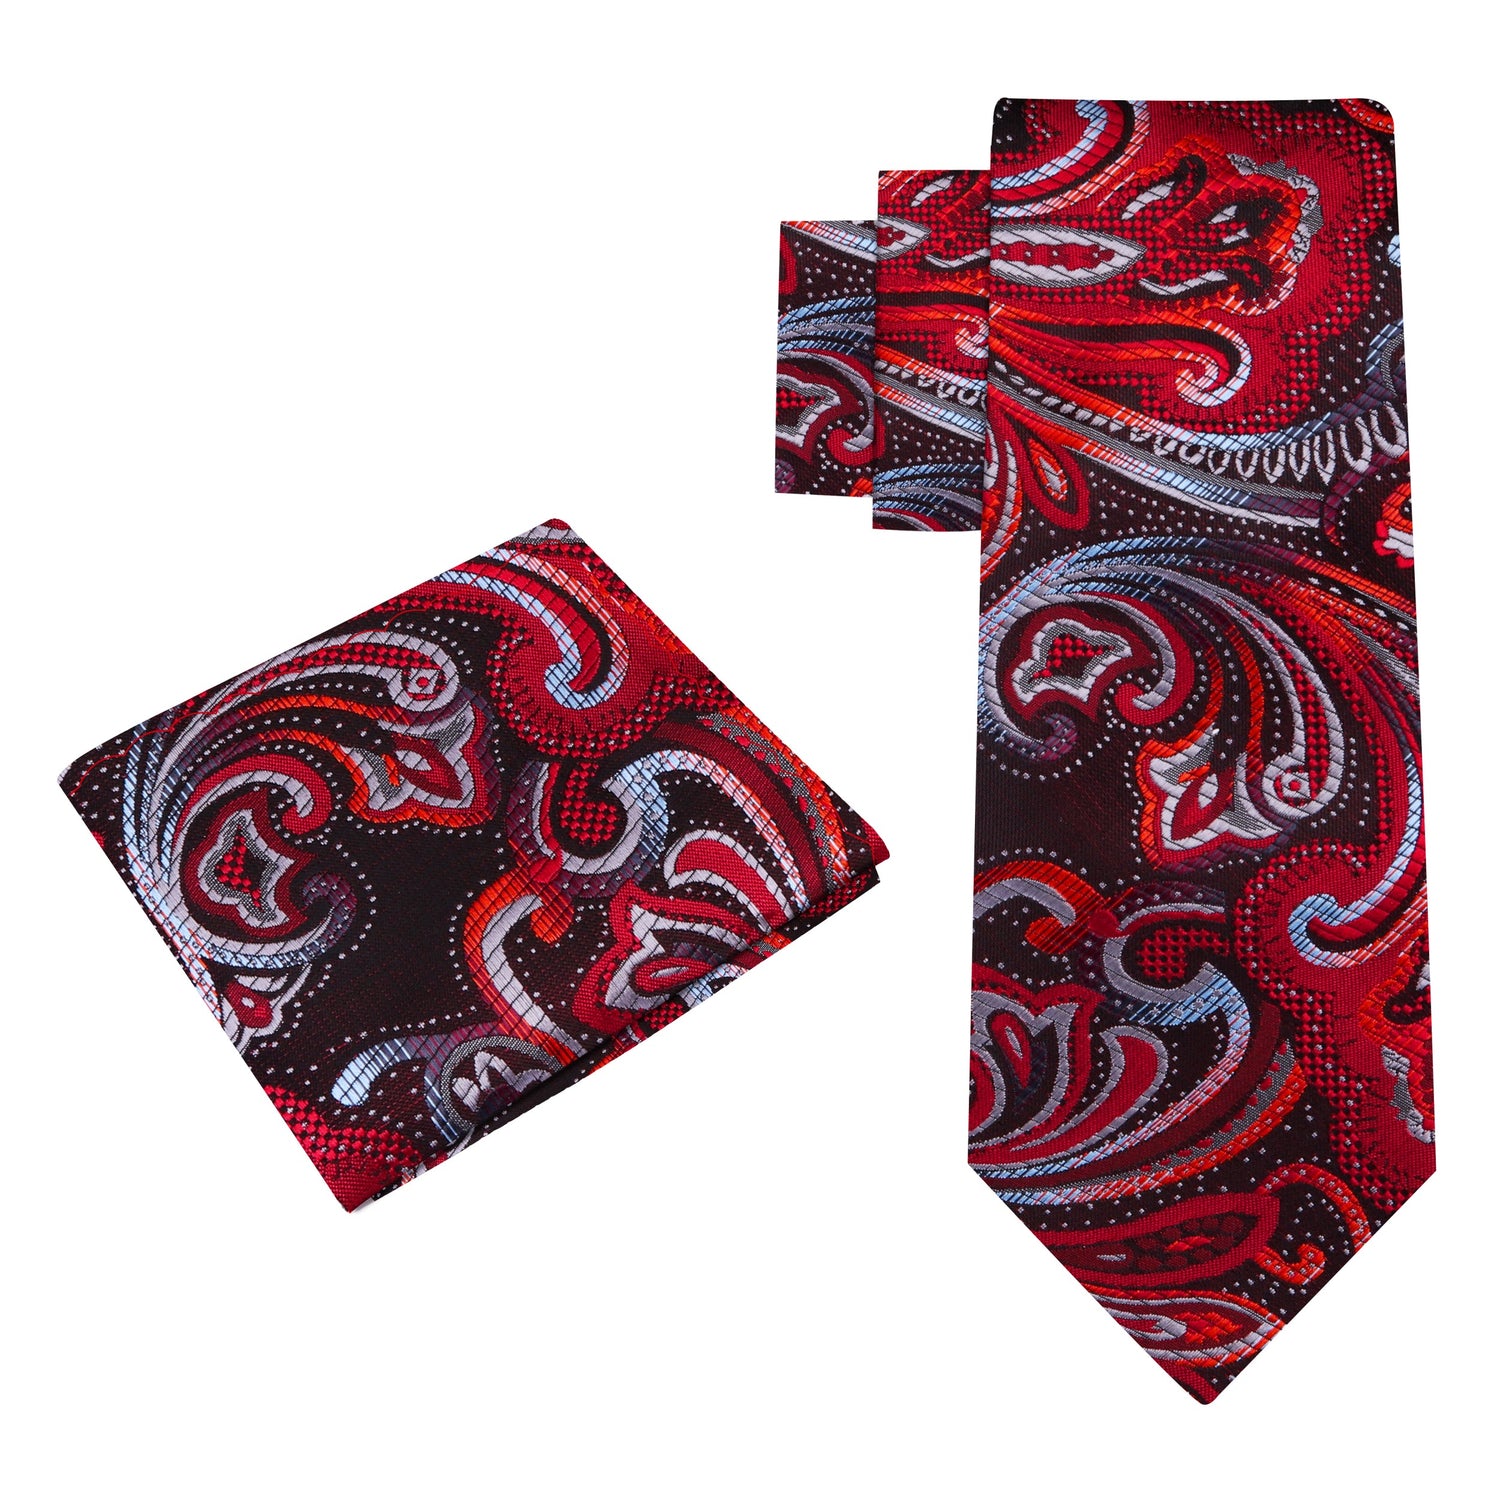 View 2: red, black, grey floral tie and pocket square